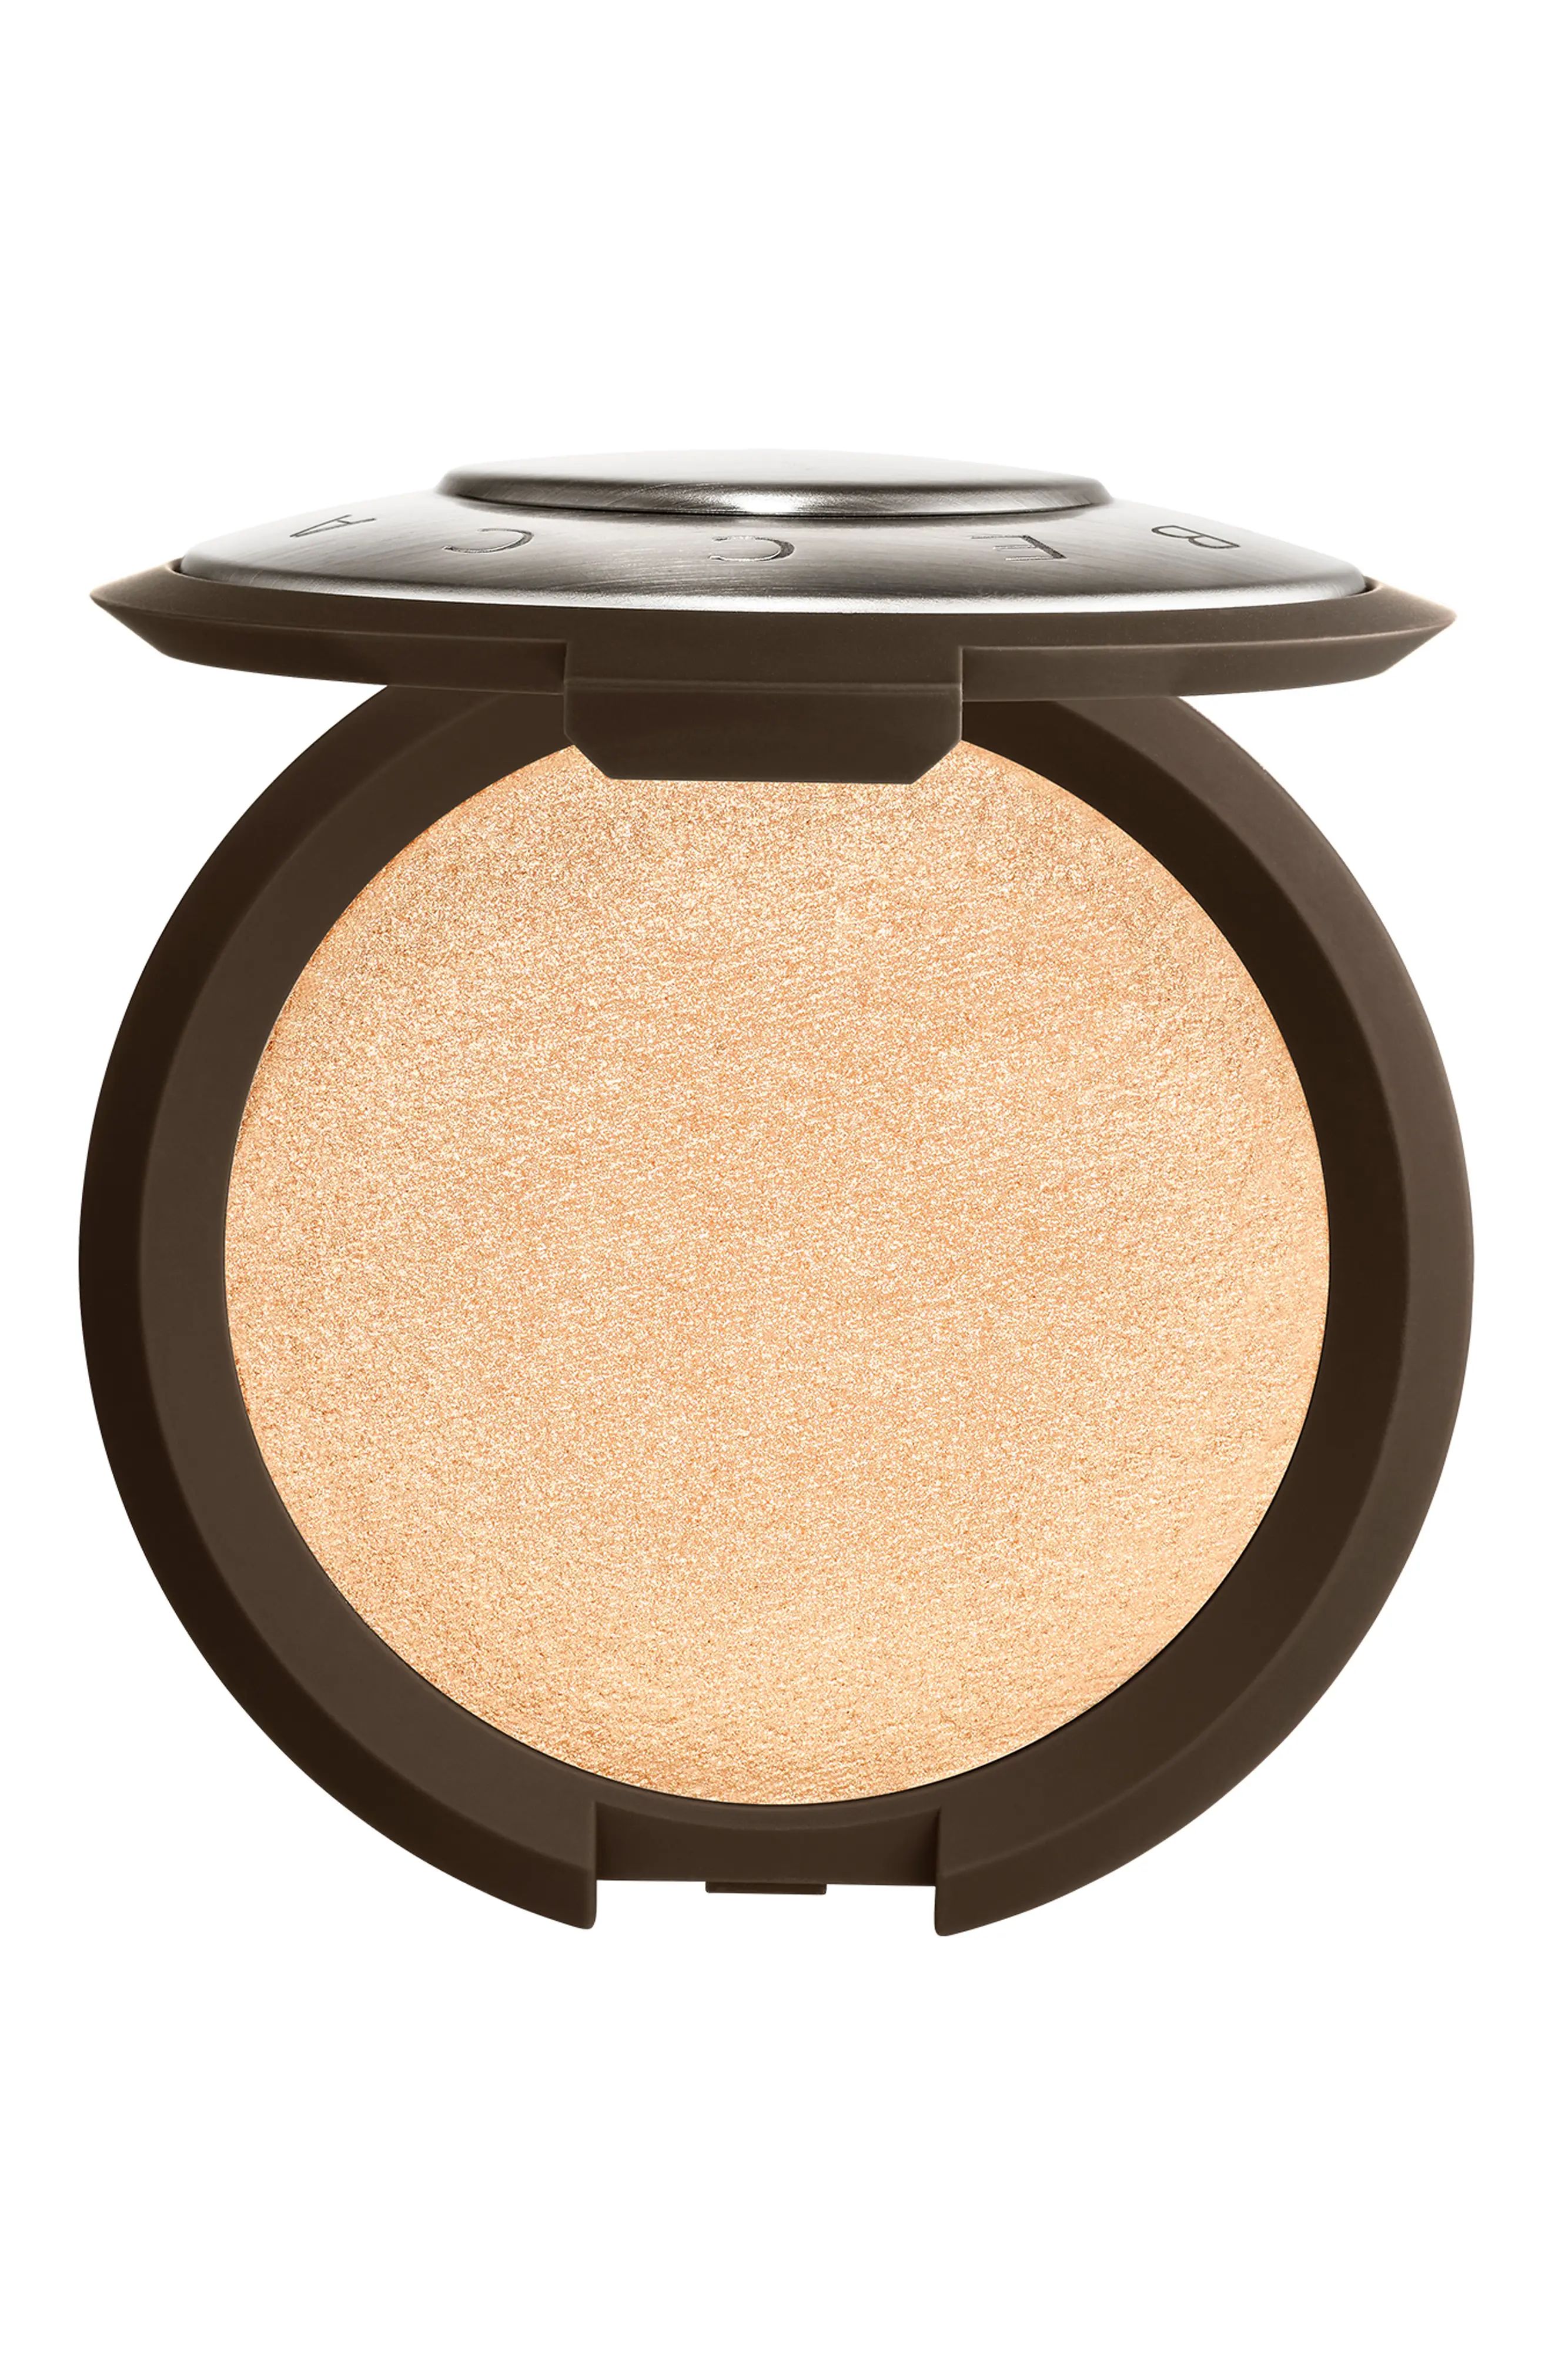 Becca Cosmetics Shimmering Skin Perfector Pressed Highlighter, Size 0.28 oz - Moonstone | Nordstrom